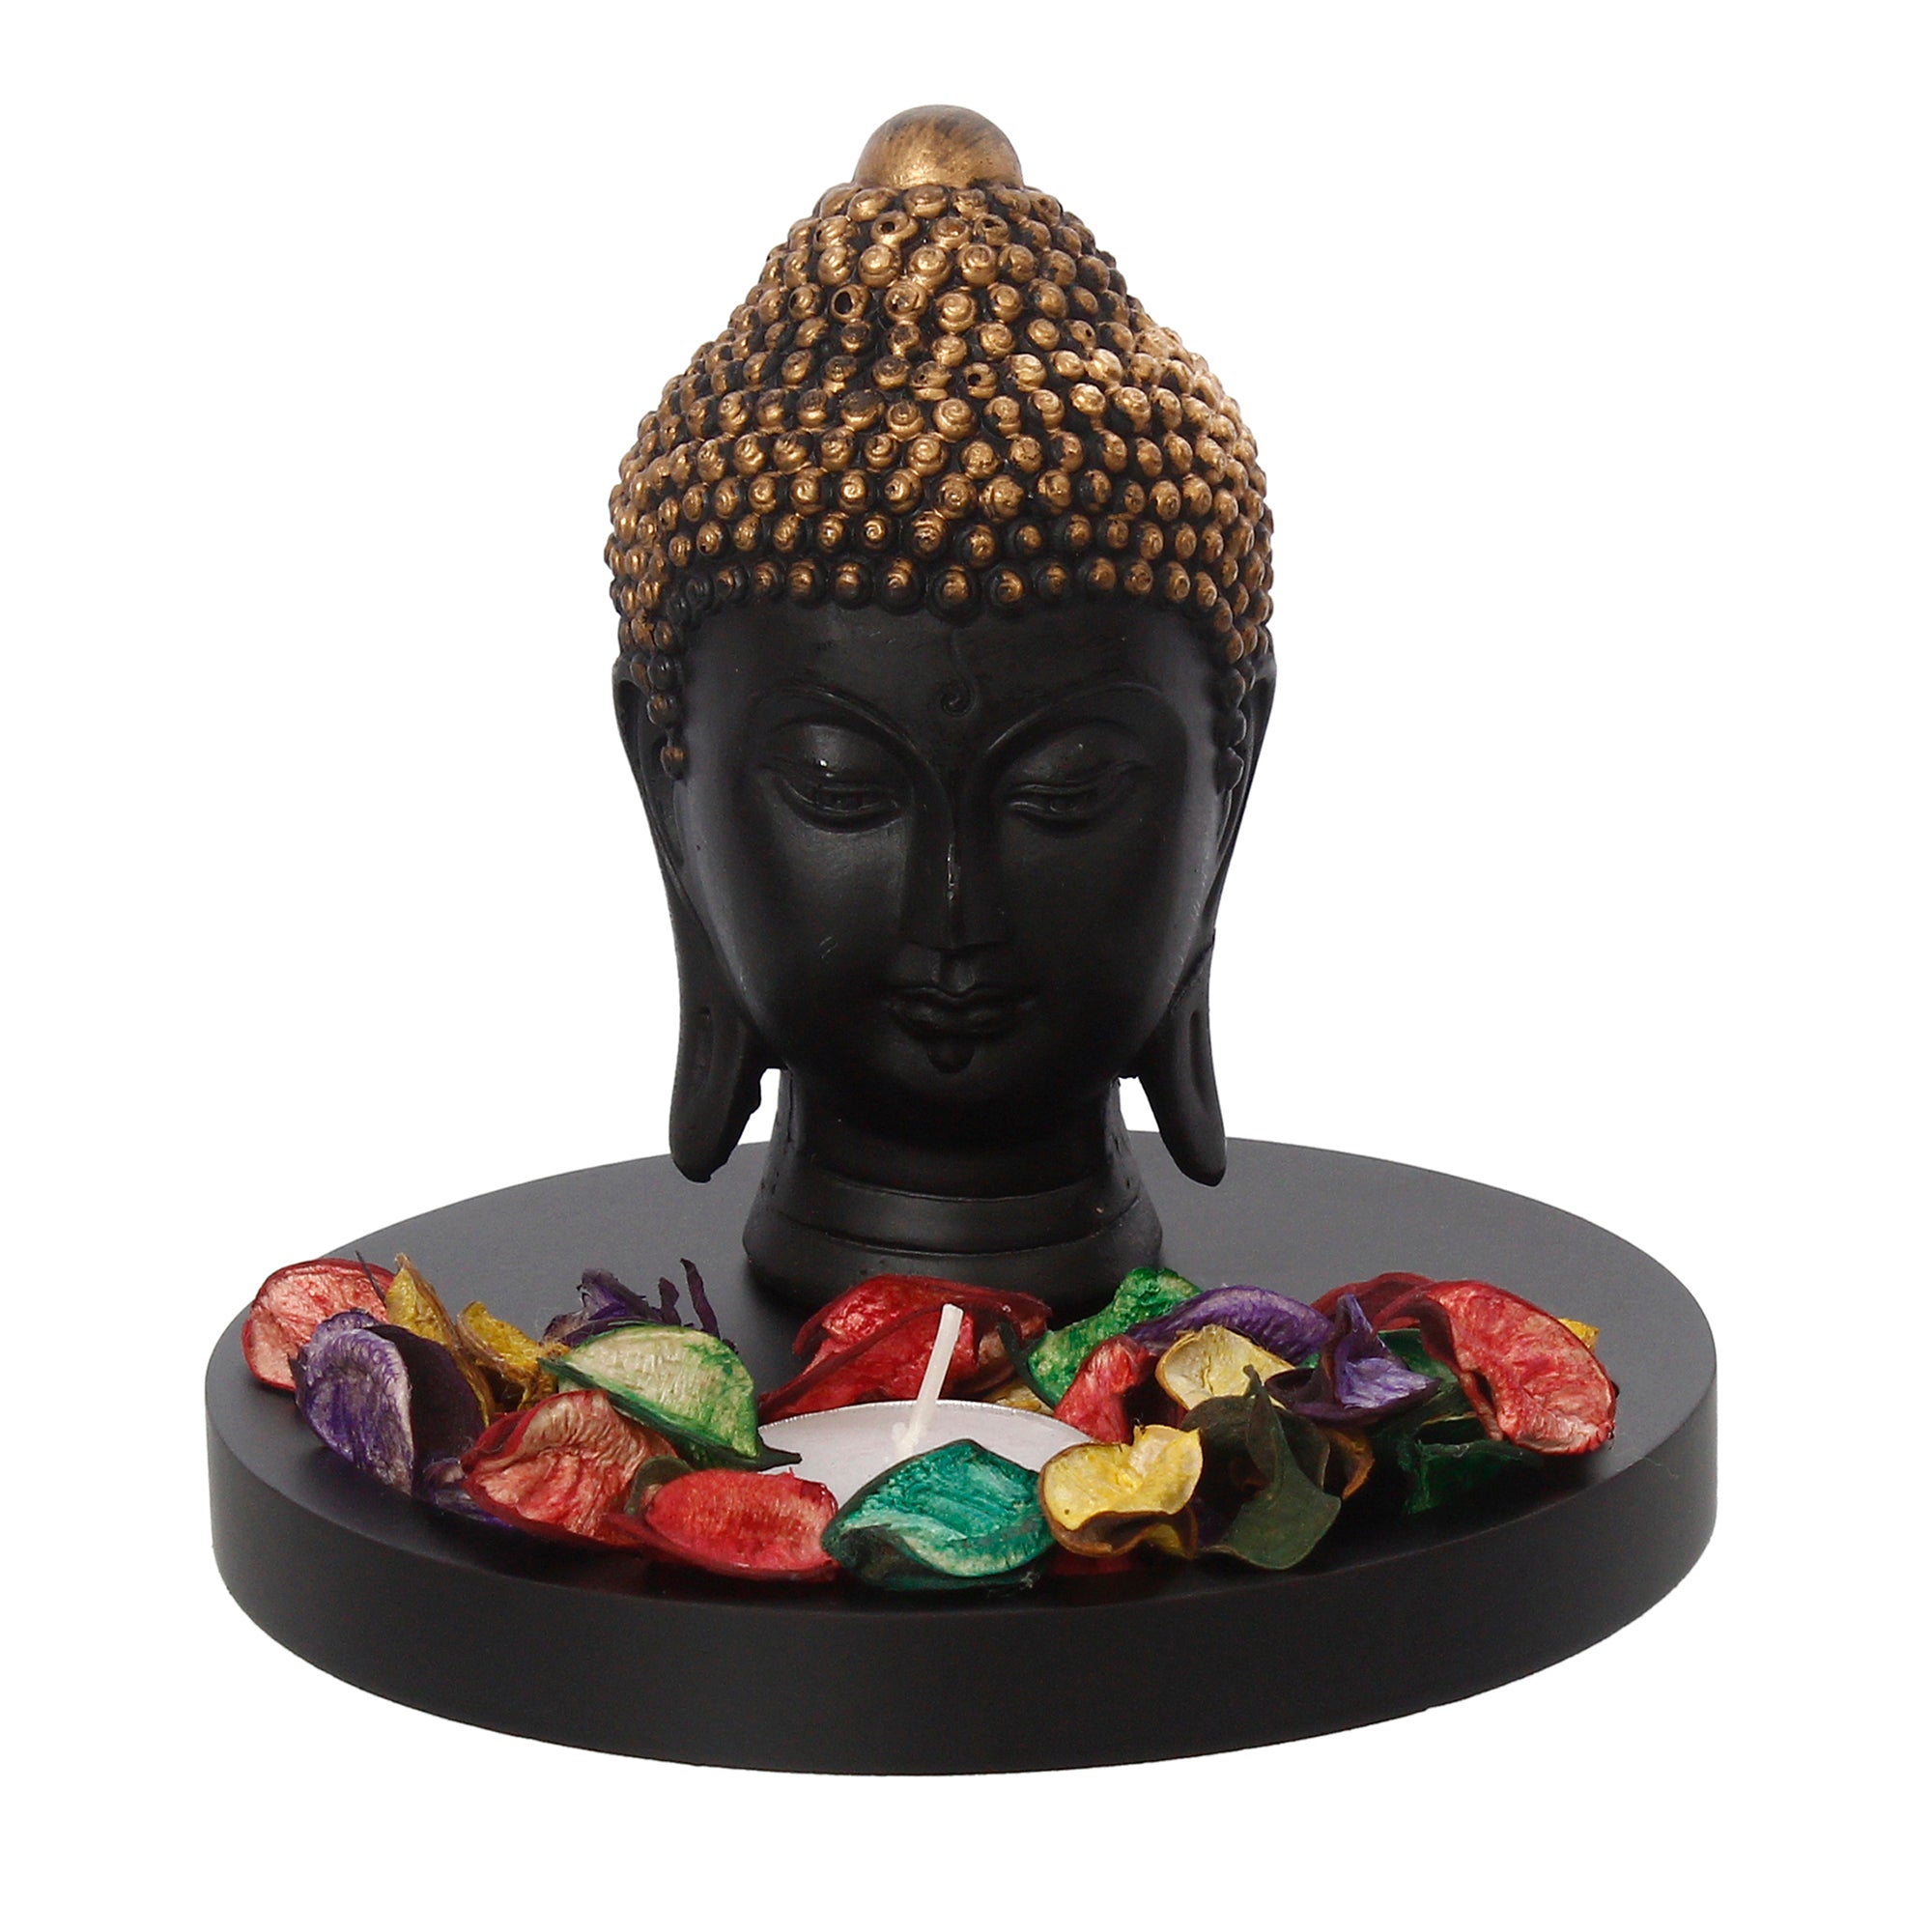 Decorative Black and Golden Buddha Head Statue with Wooden Base, Fragranced Petals and Tealight 2